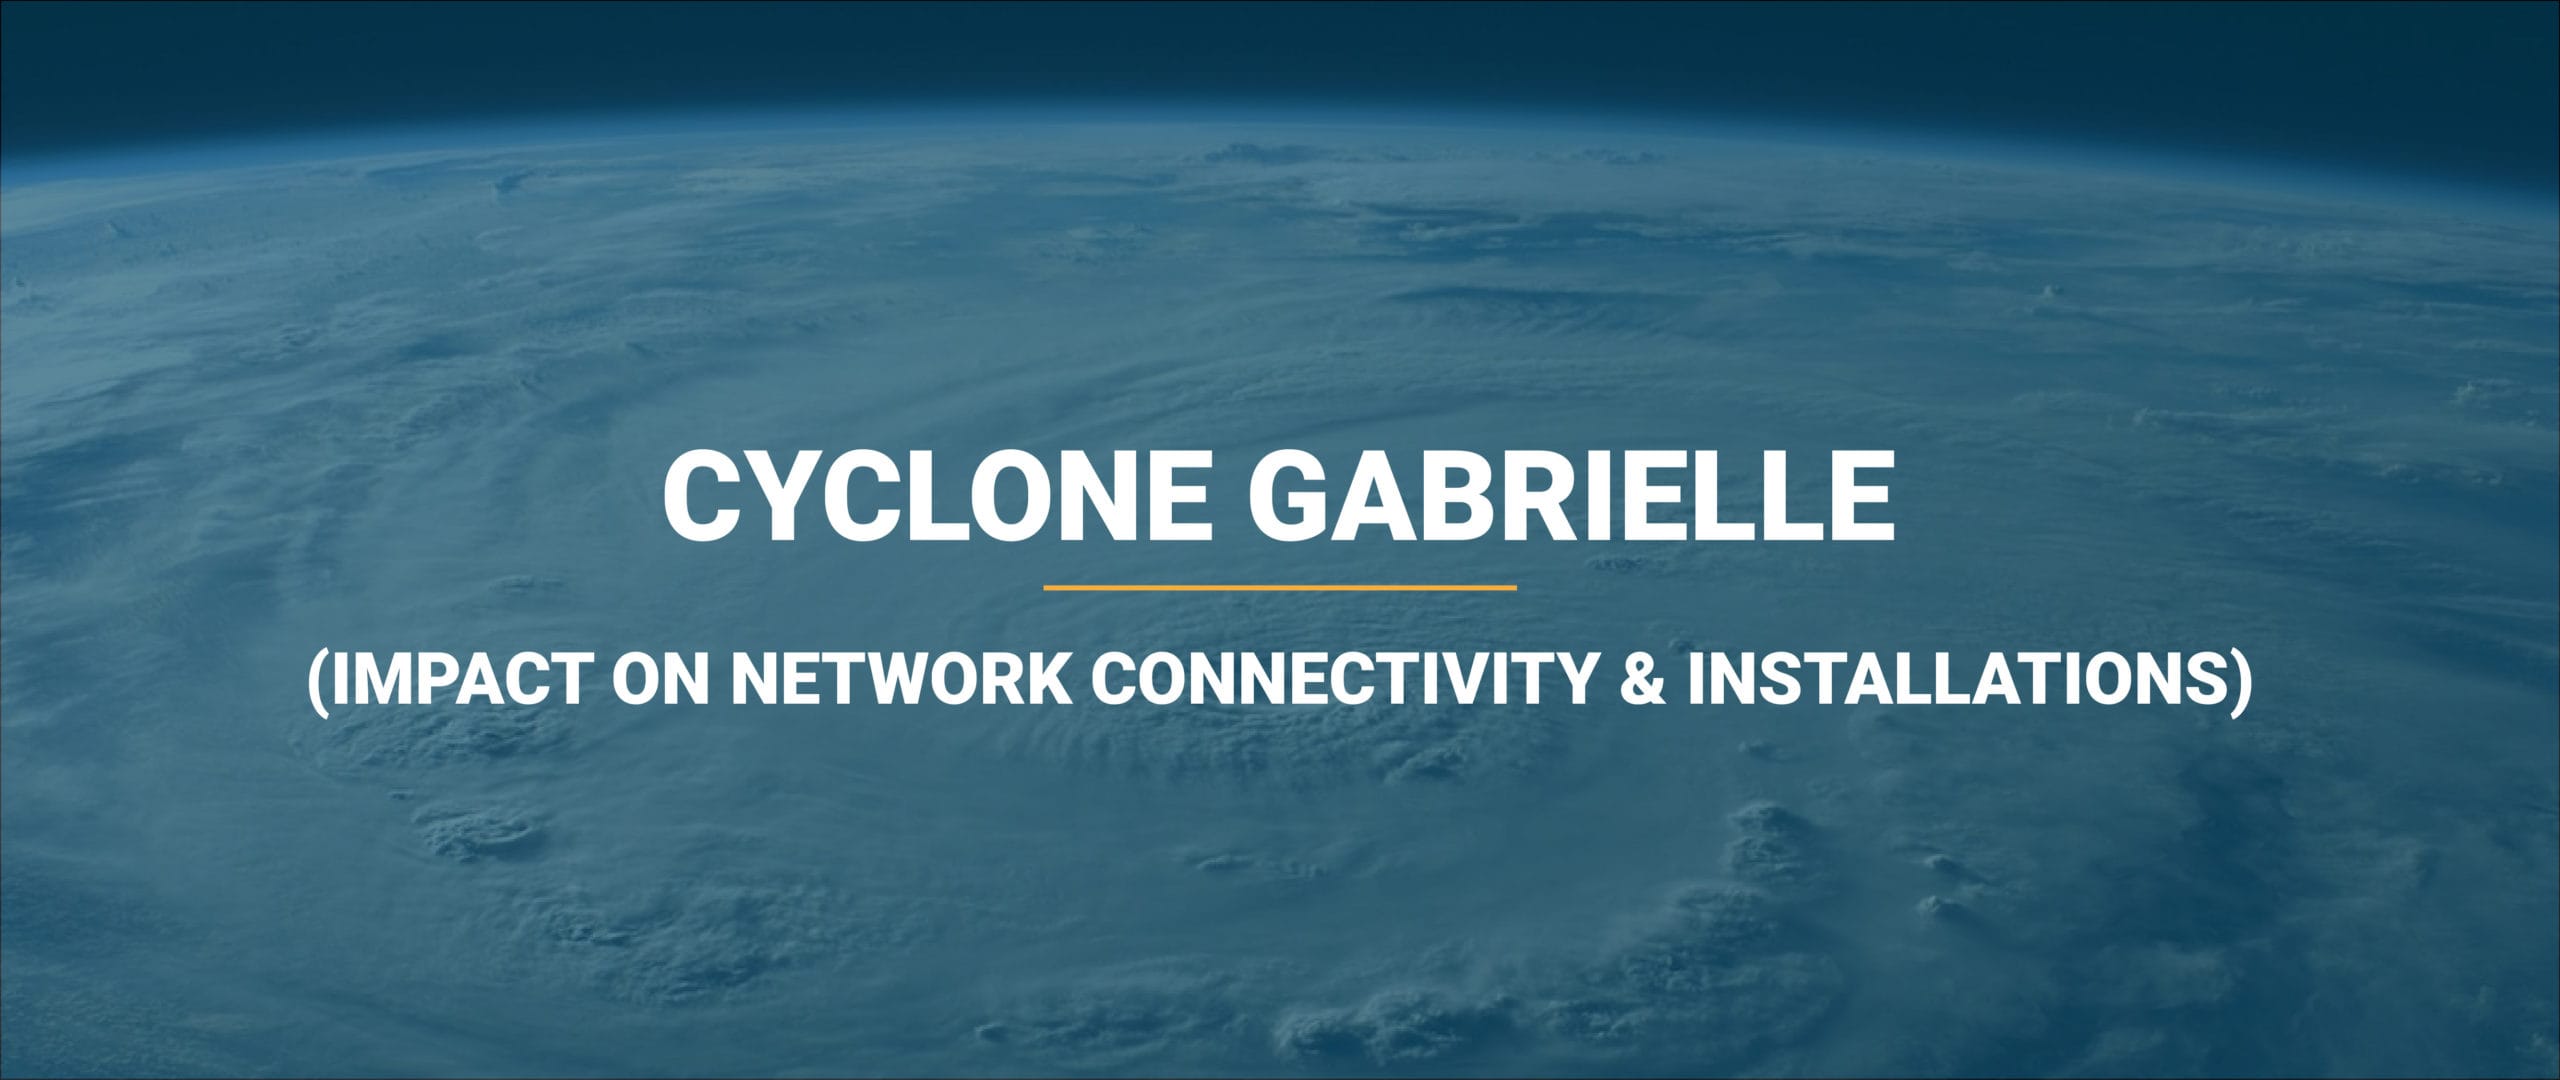 Cyclone Gabrielle impact on network and connectivity